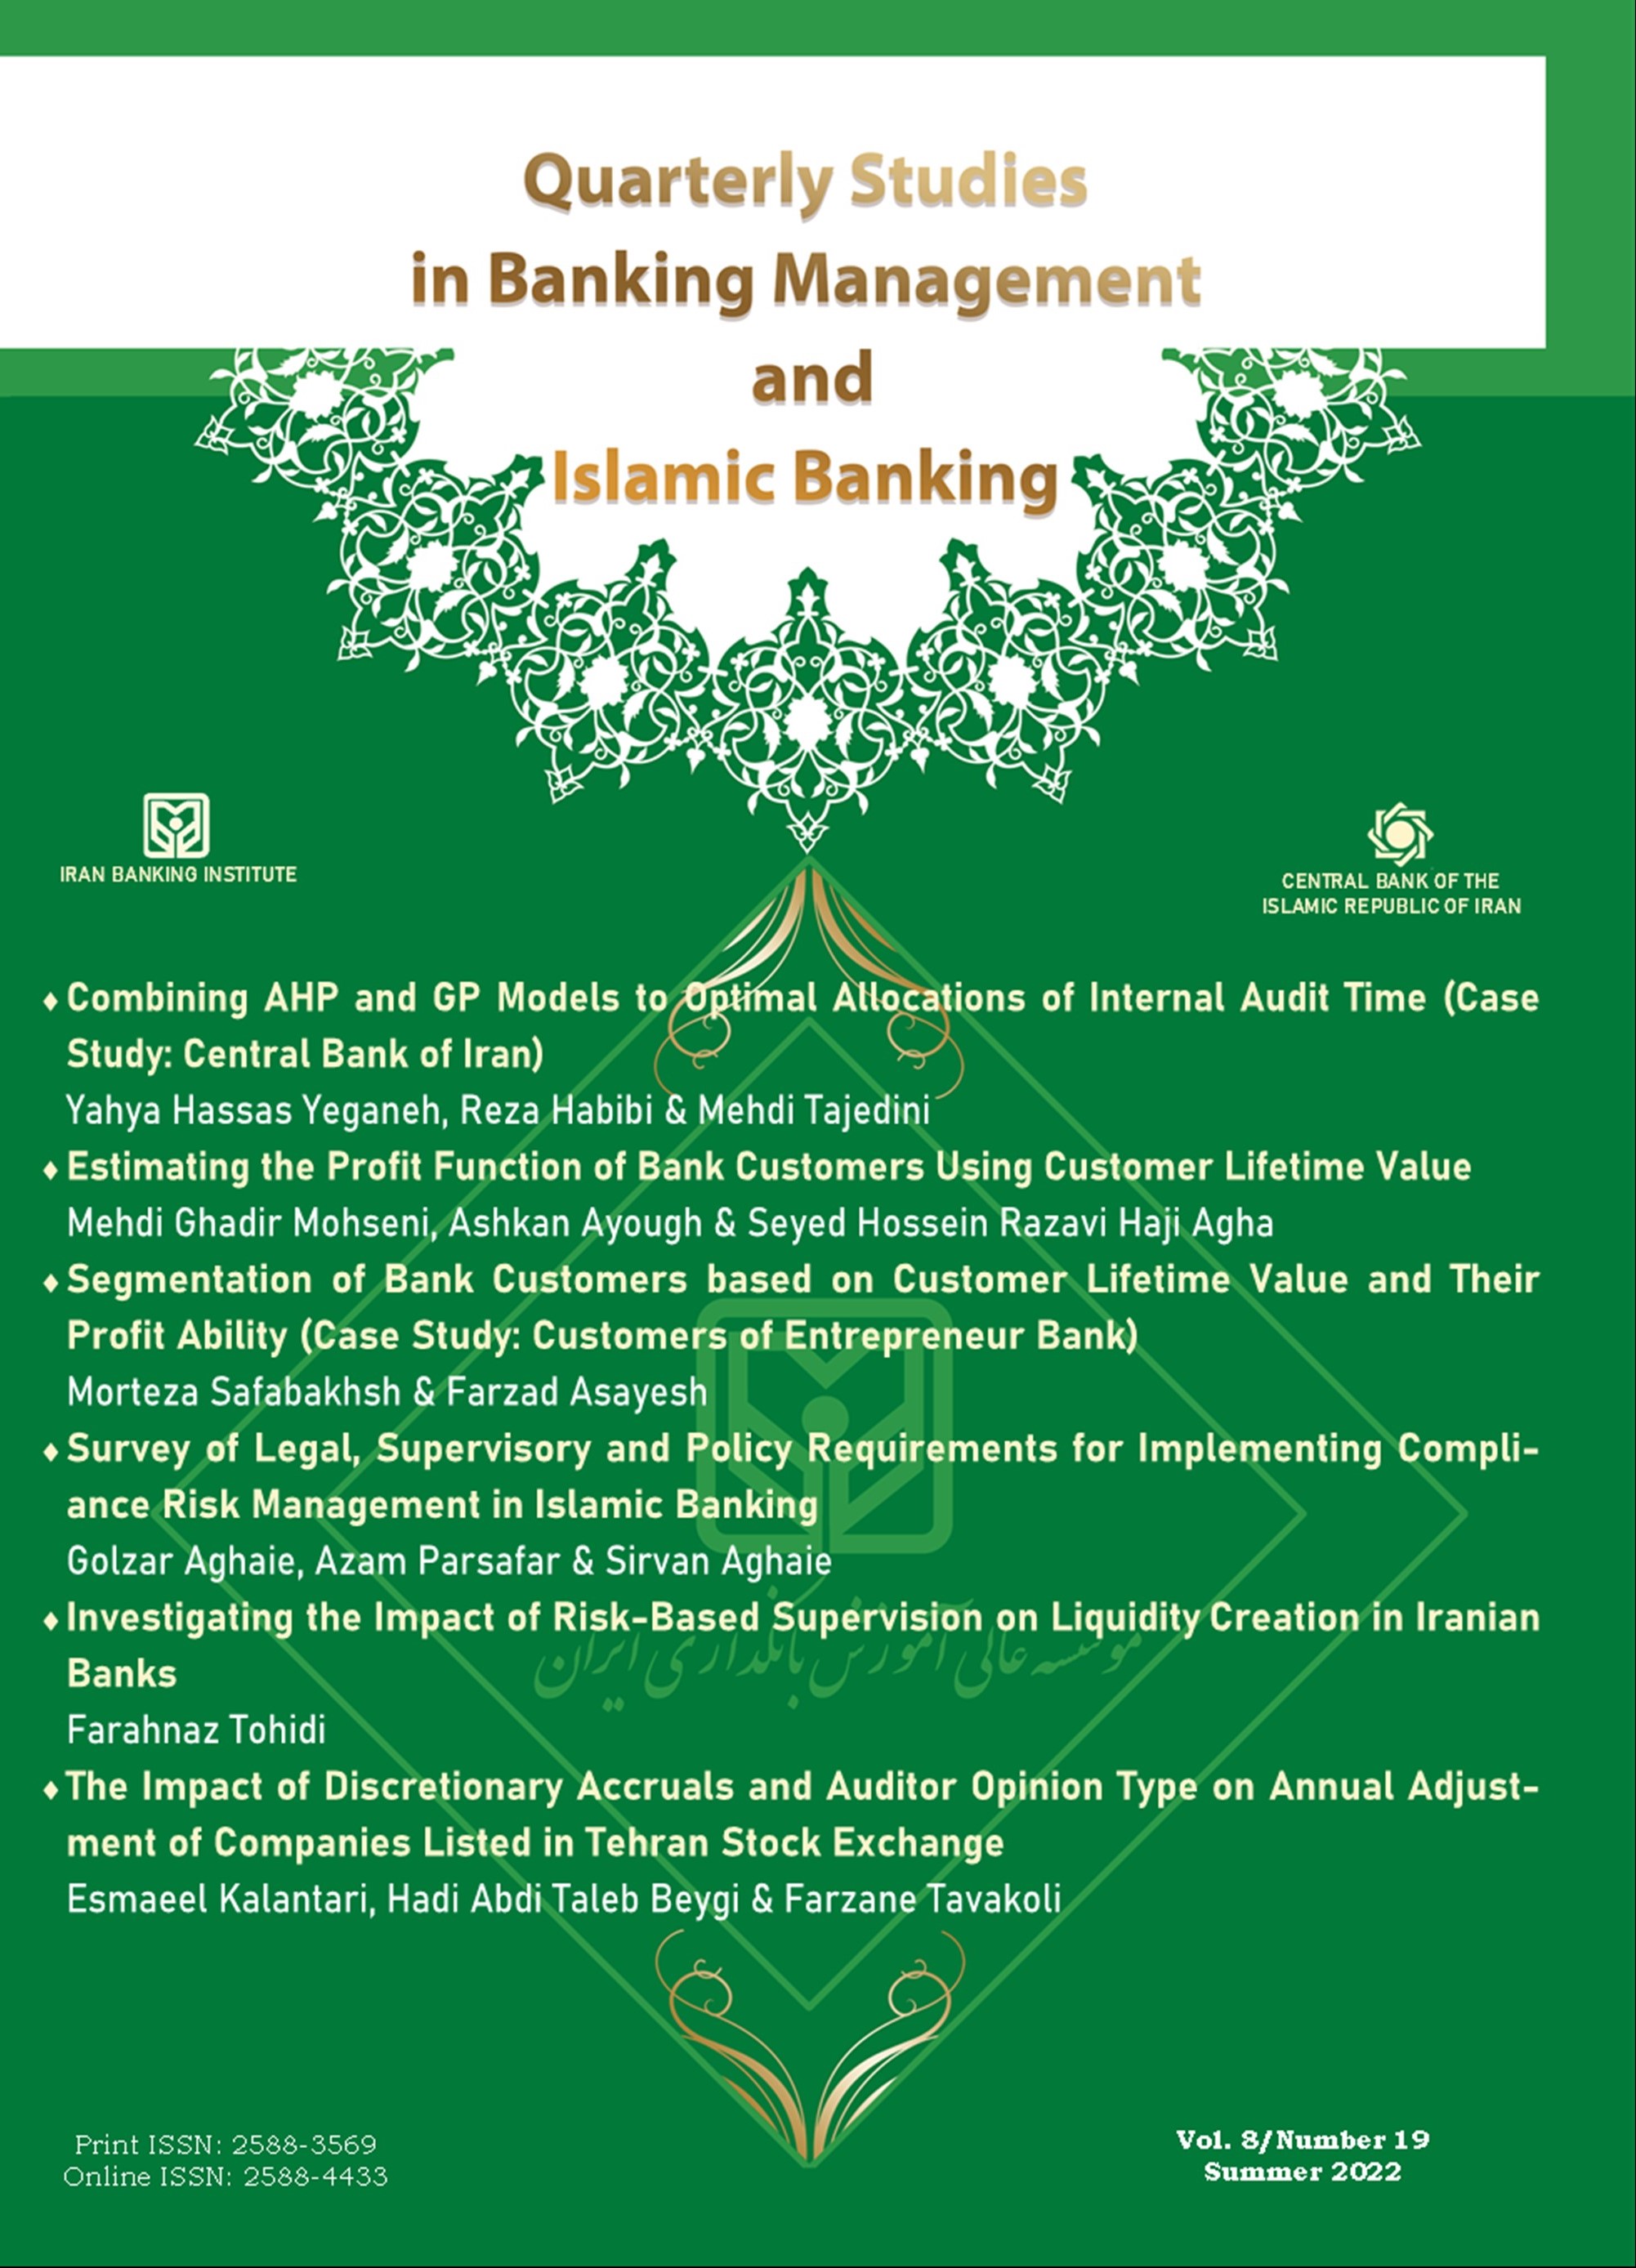 Quarterly Studies in Banking Management and Islamic Banking